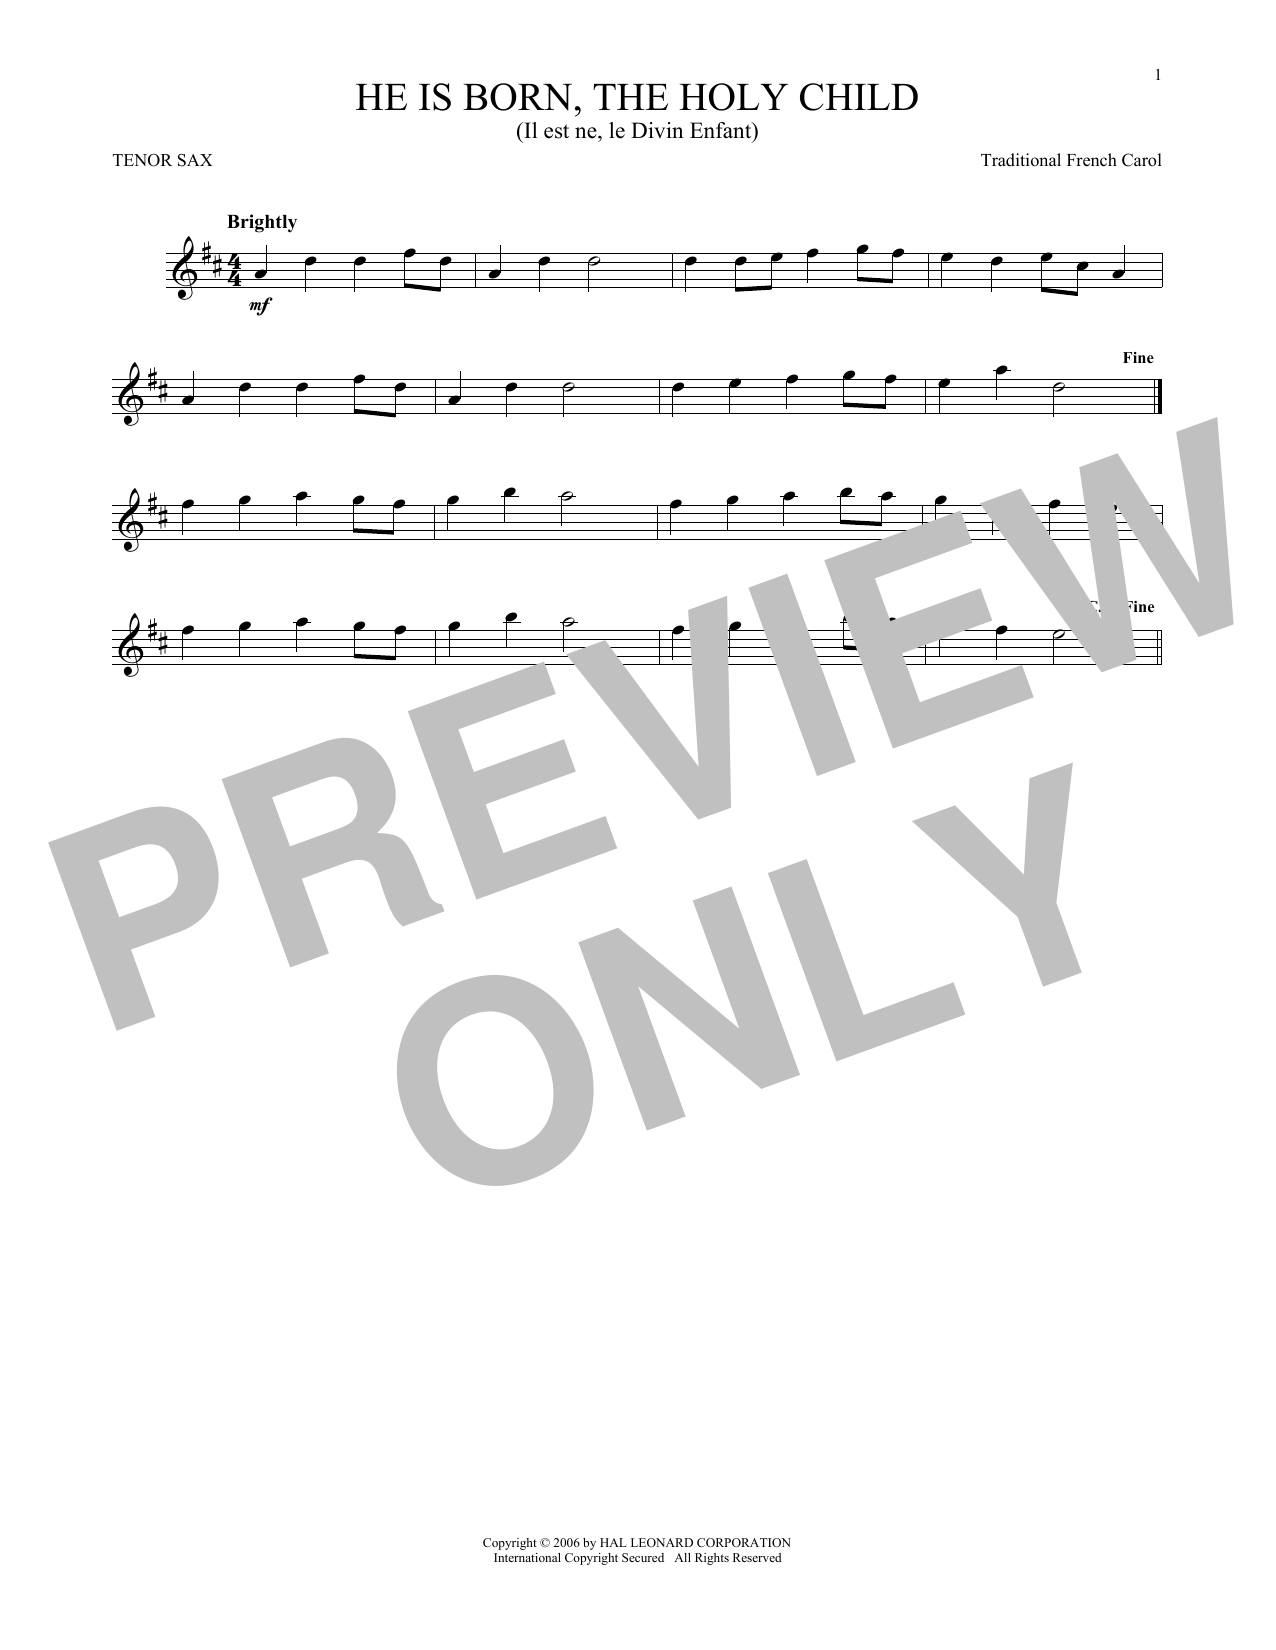 Download Traditional French Carol He Is Born, The Holy Child (Il Est Ne, Sheet Music